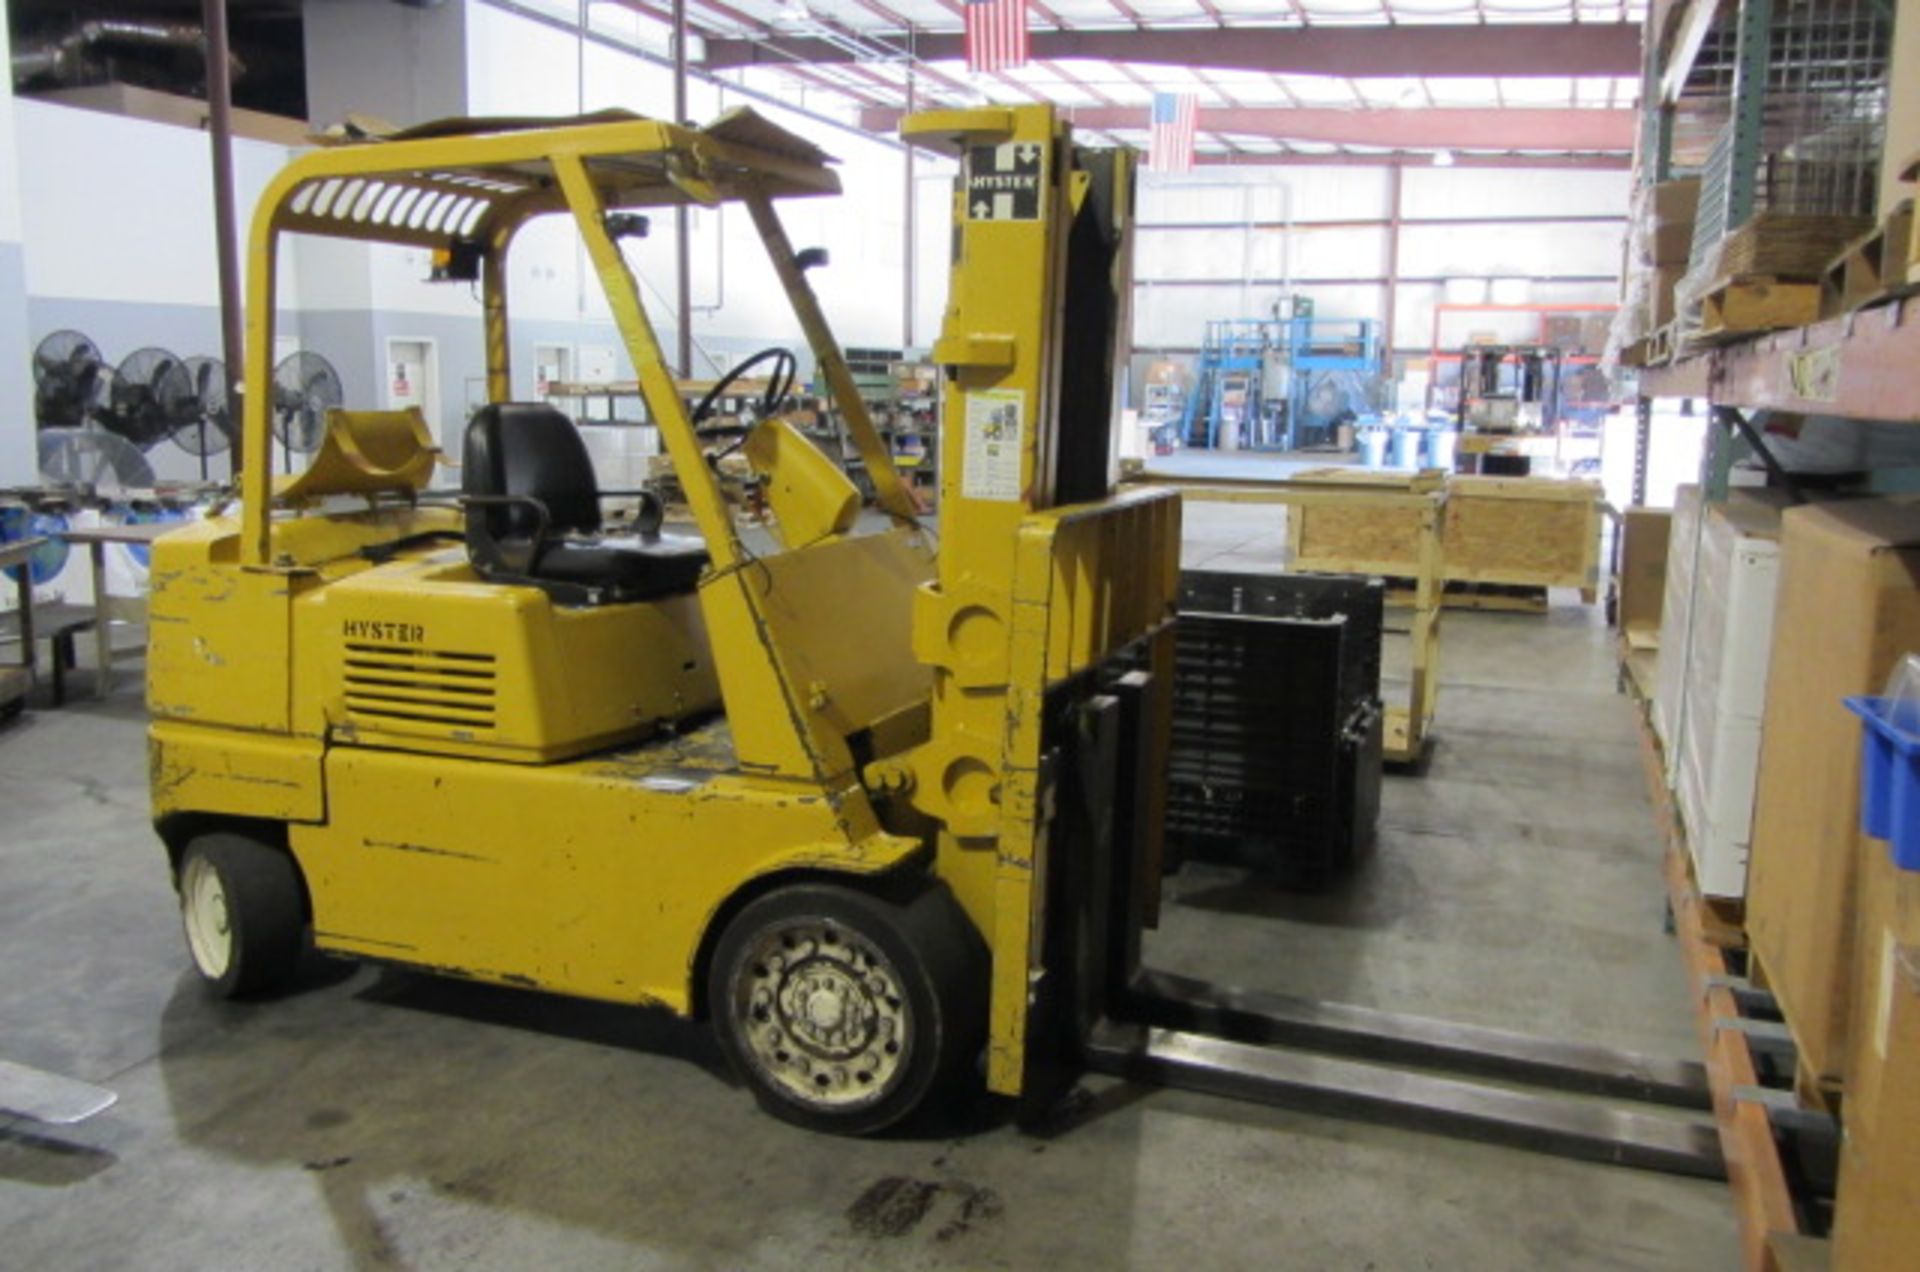 Hyster Model S100E 10,000lb Propane Forklift with 3-Stage Mast, 6' Forks, Headlights, (4) Hard